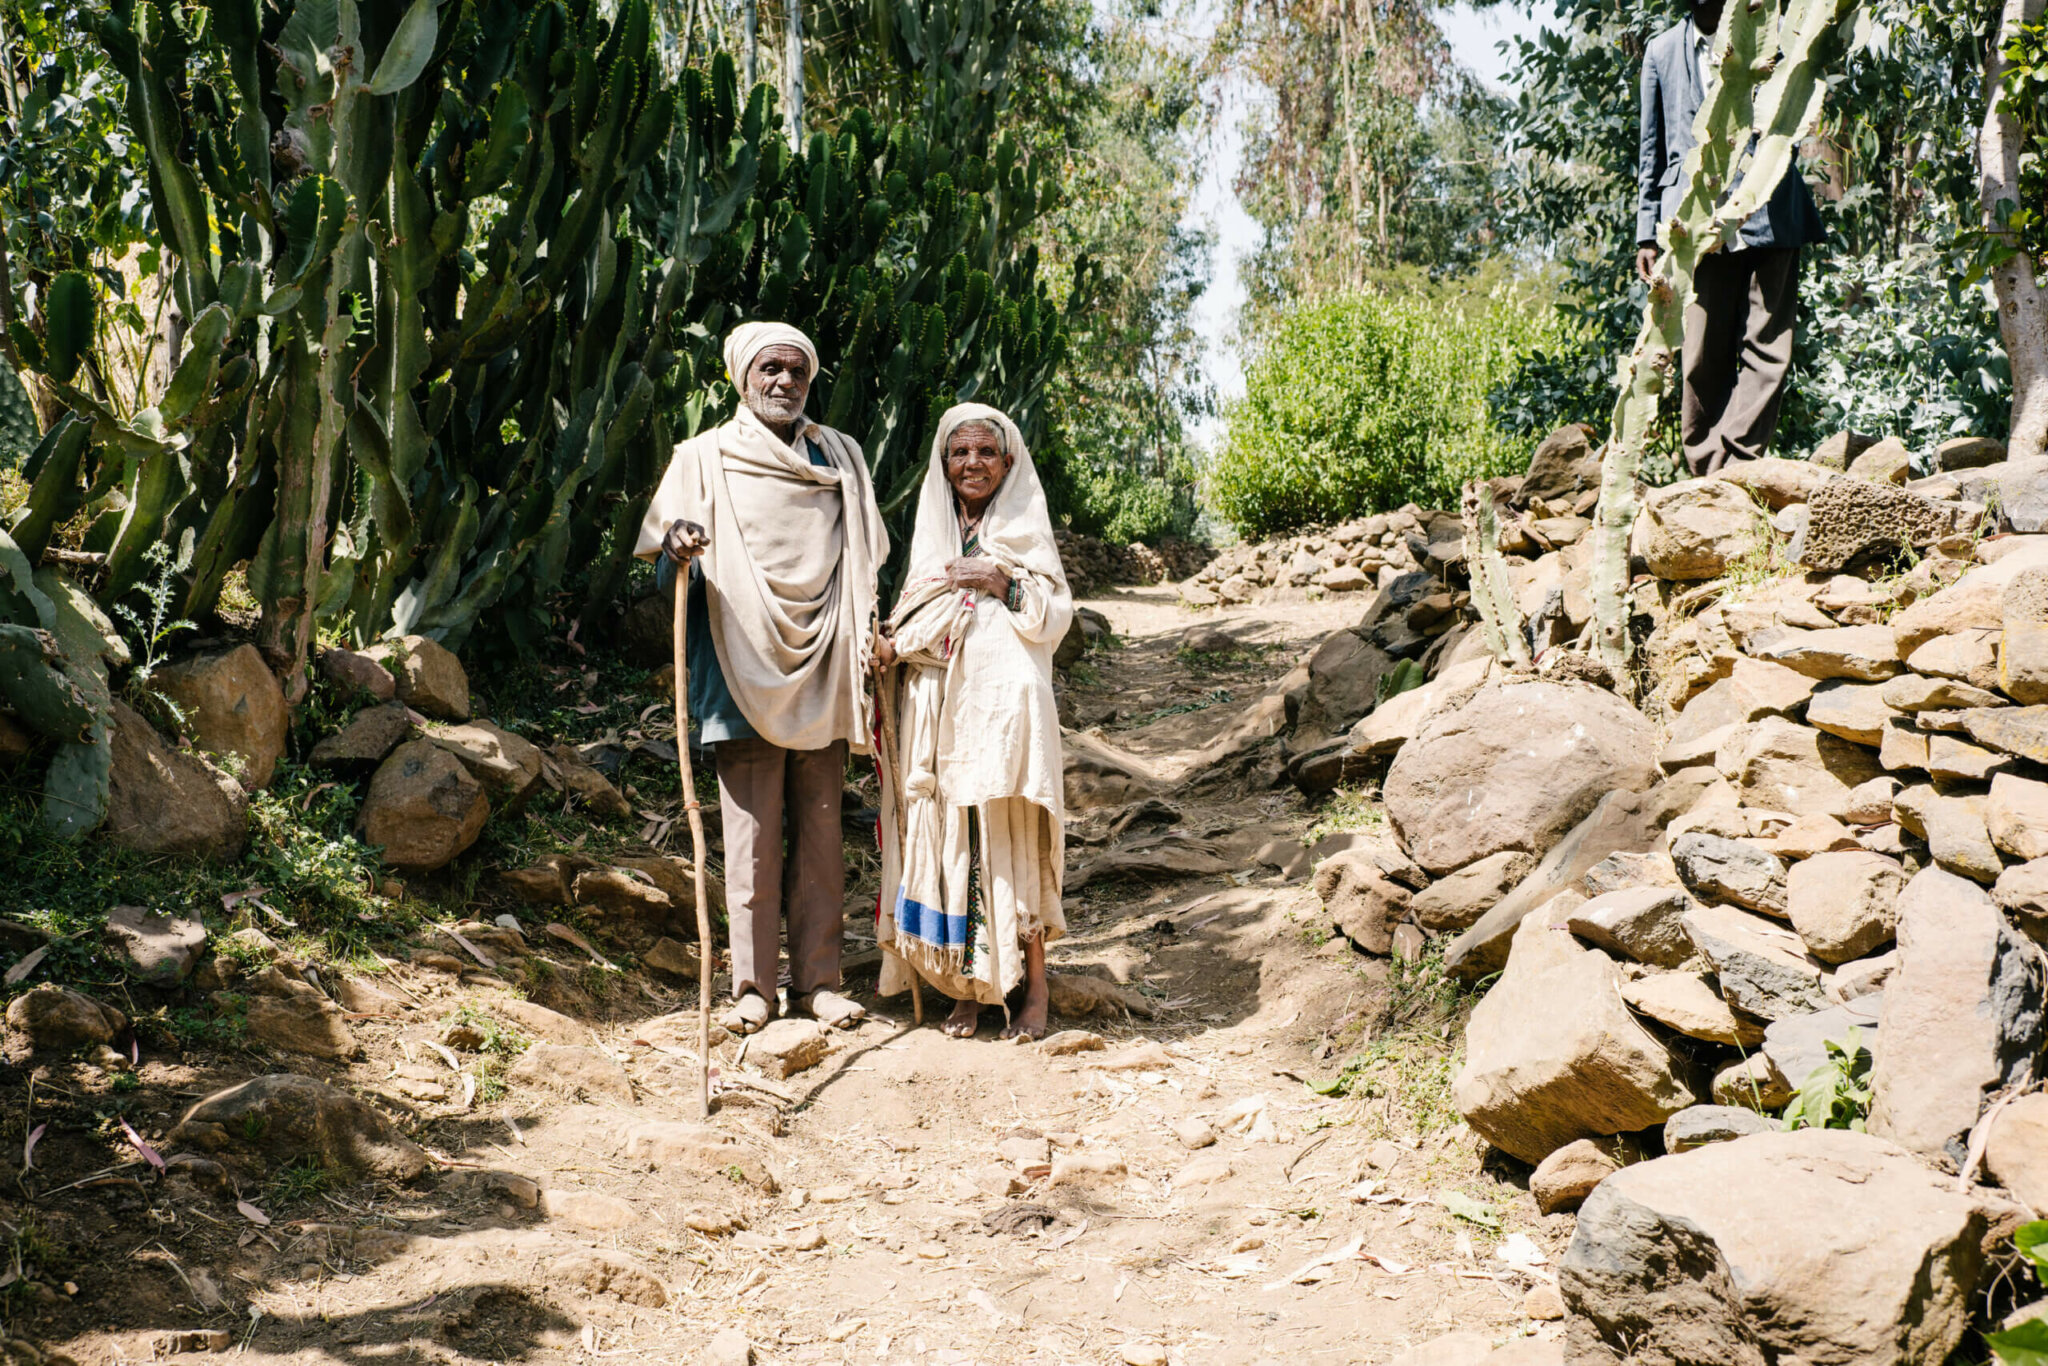 Mullu, an older Ethiopian woman, and her husband, both in traditional white cotton clothes and head covers, on a dirt path framed by rocks.